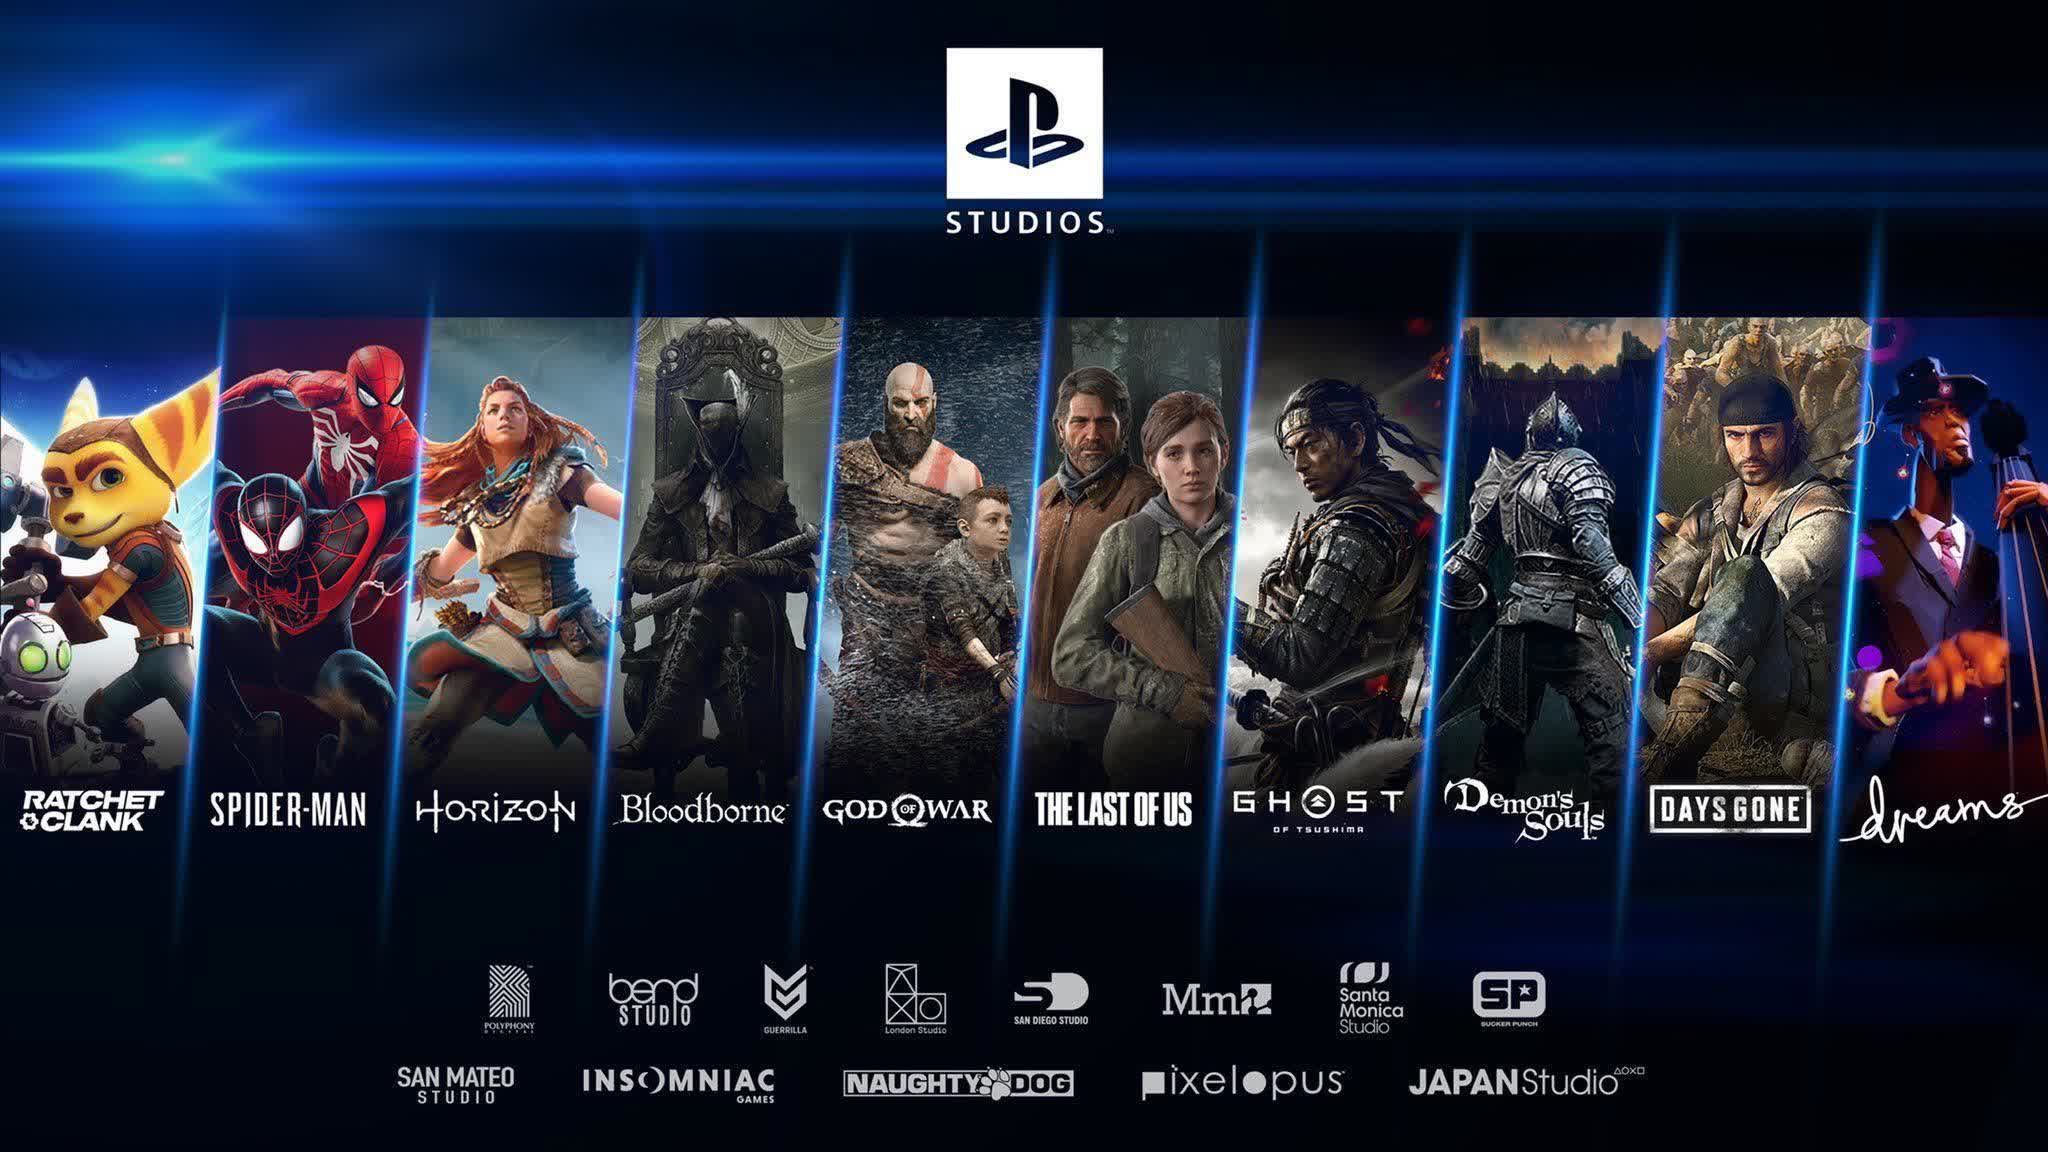 PlayStation Studios has 25 upcoming PS5 titles, half are new IPs